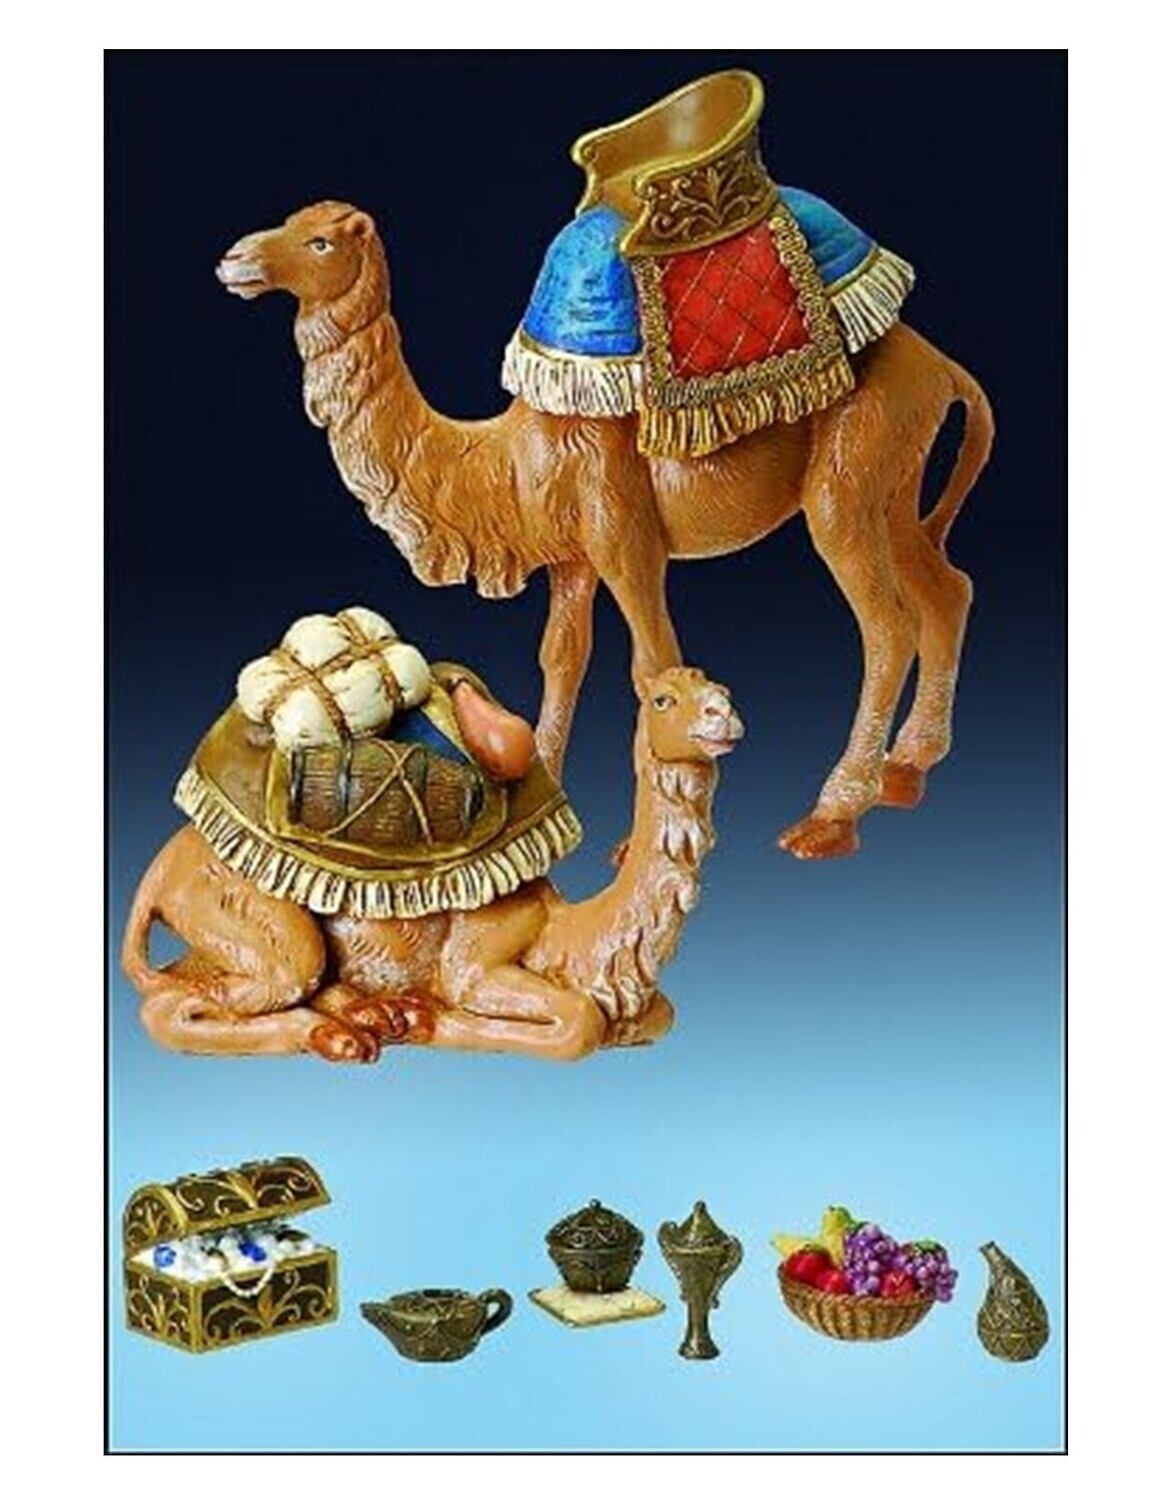 Fontanini "Three Kings Nativity Accessories" 8 Piece Set -Camels Sold Separately (59523)